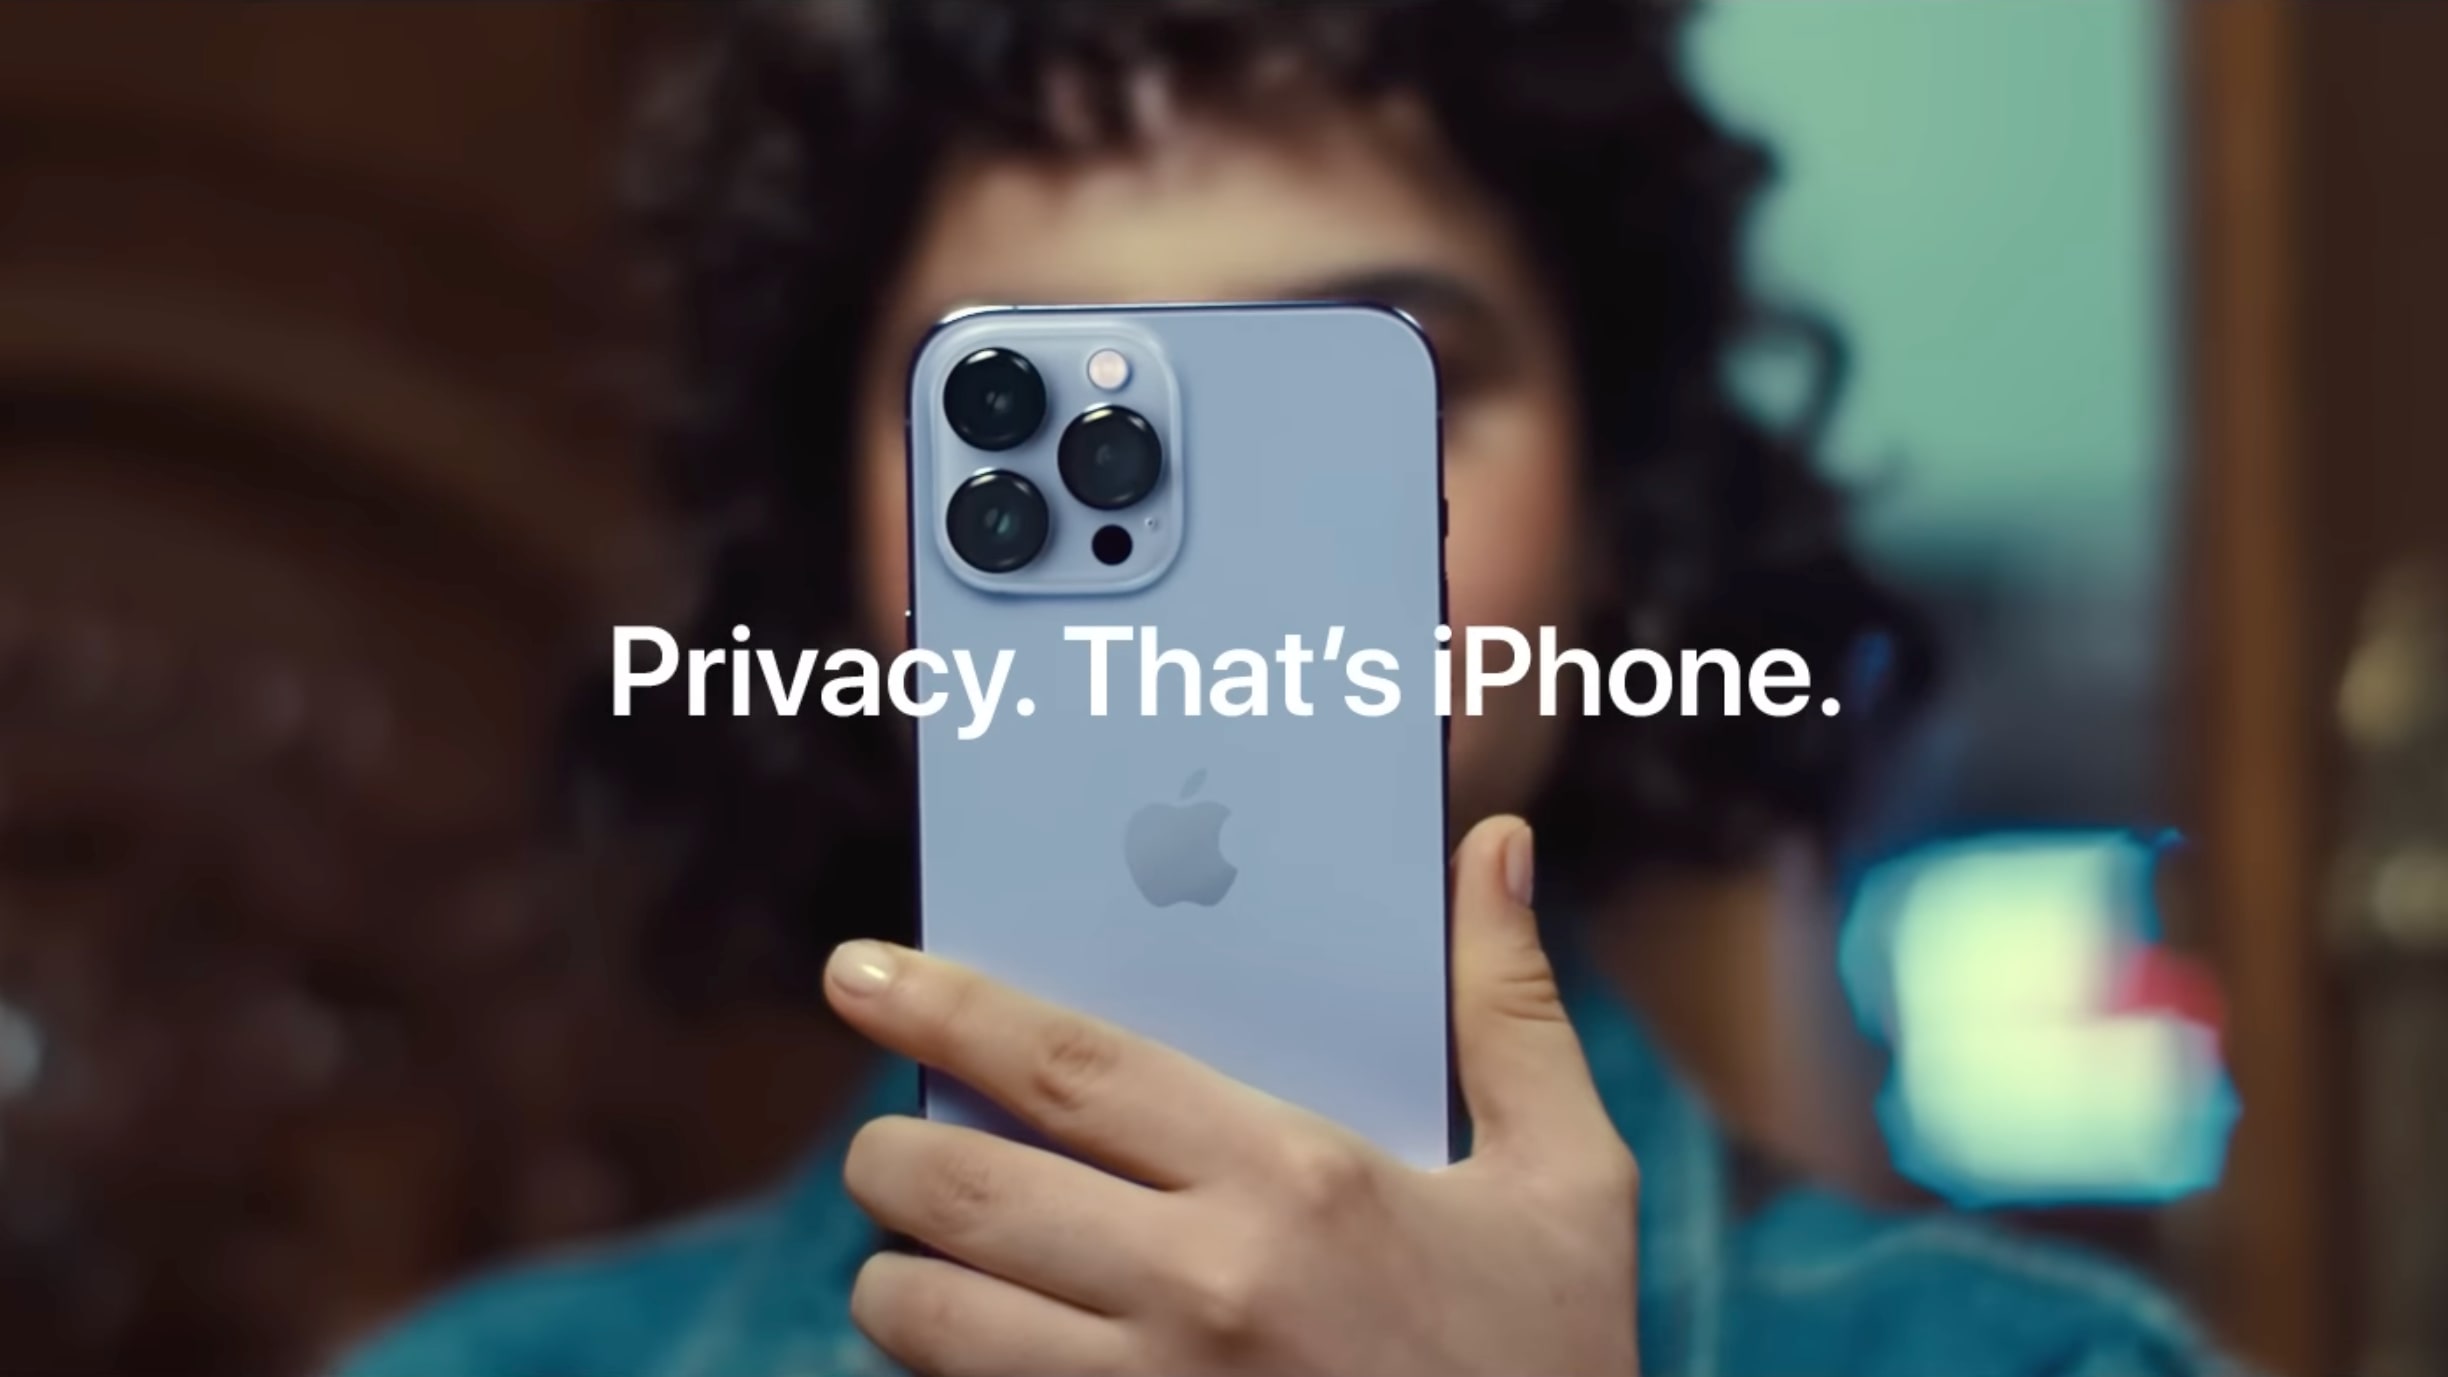 A scene from Apple's video commercial showing a woman's face obscured by an iPhone 13 Pro Max she's holding in front of her face, with the tagline "Privacy. That's iPhone" overlaid on top